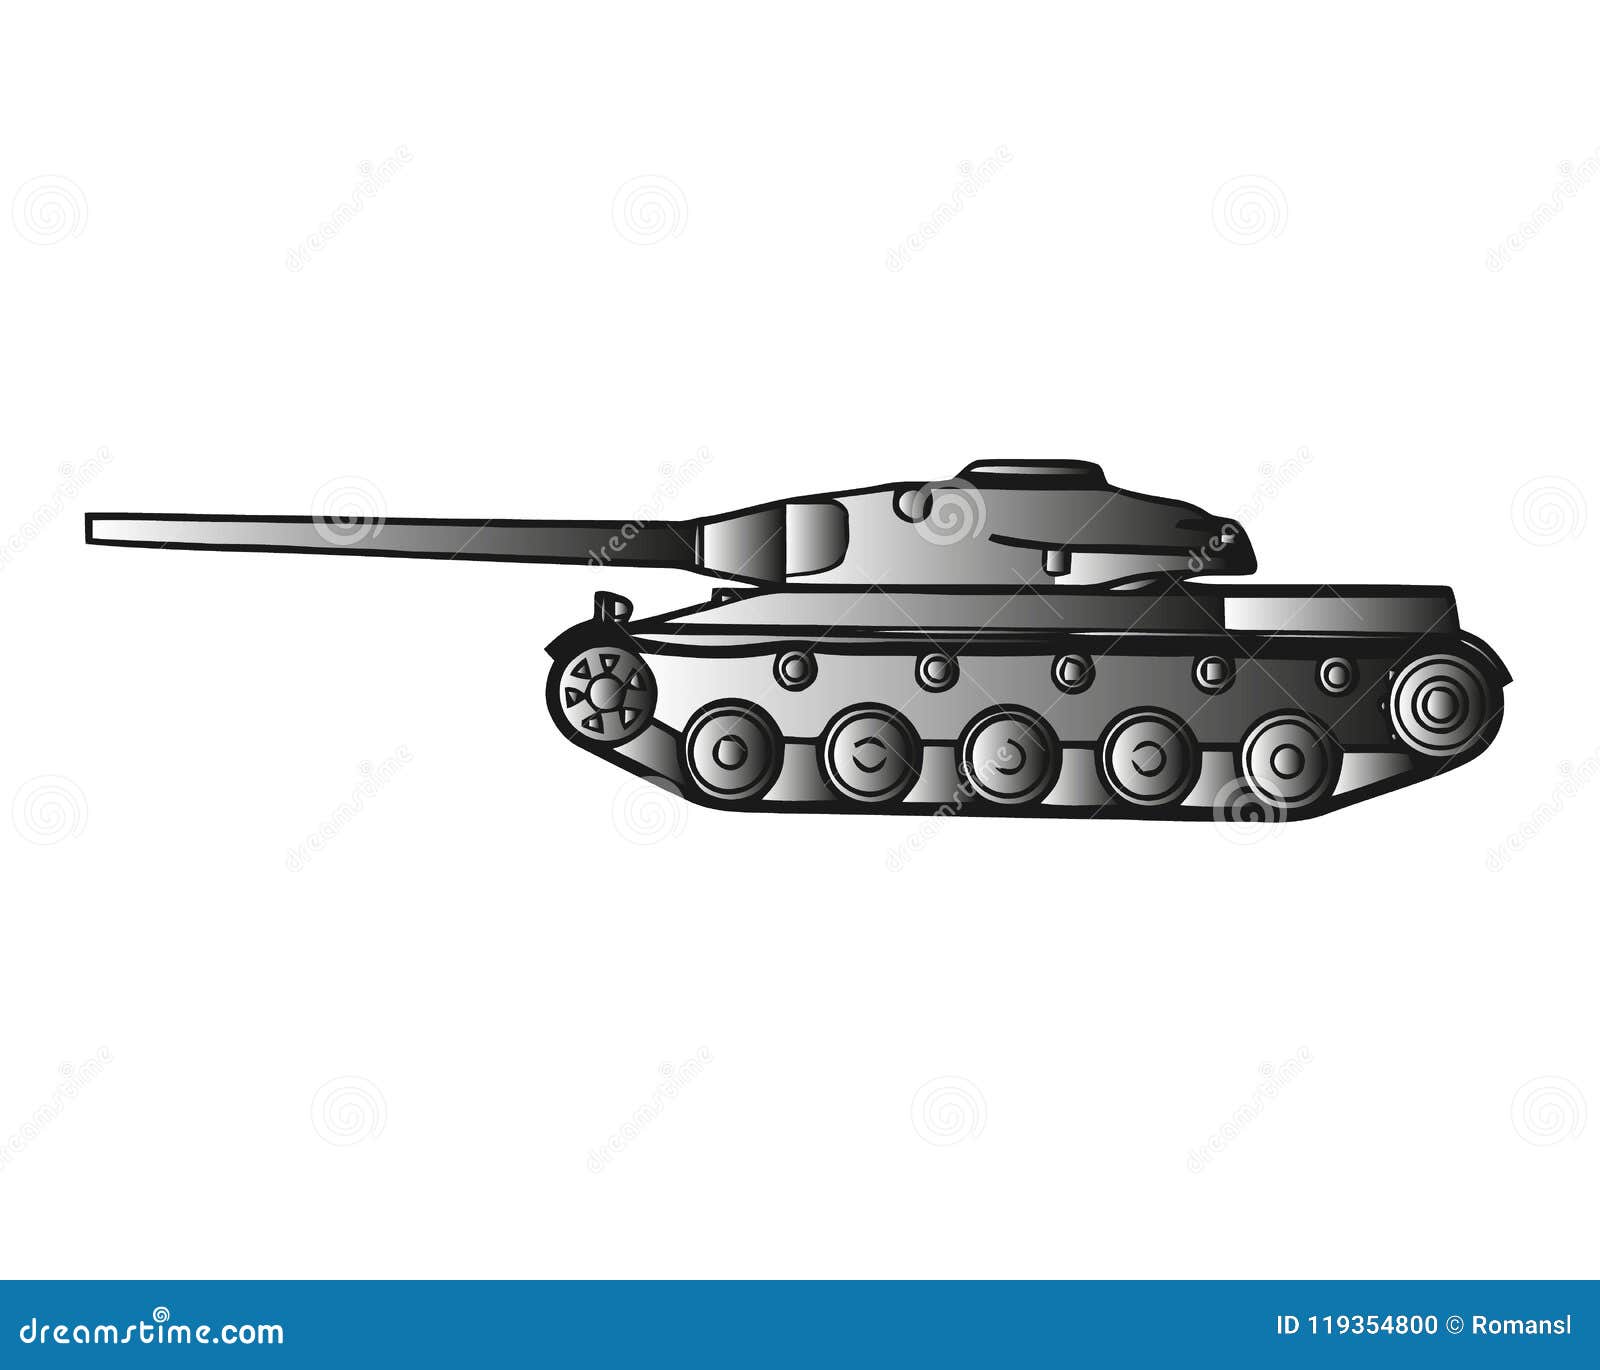 military tank  on white. armoured fighting vehicle ed for front-line combat, with heavy firepower, strong armour